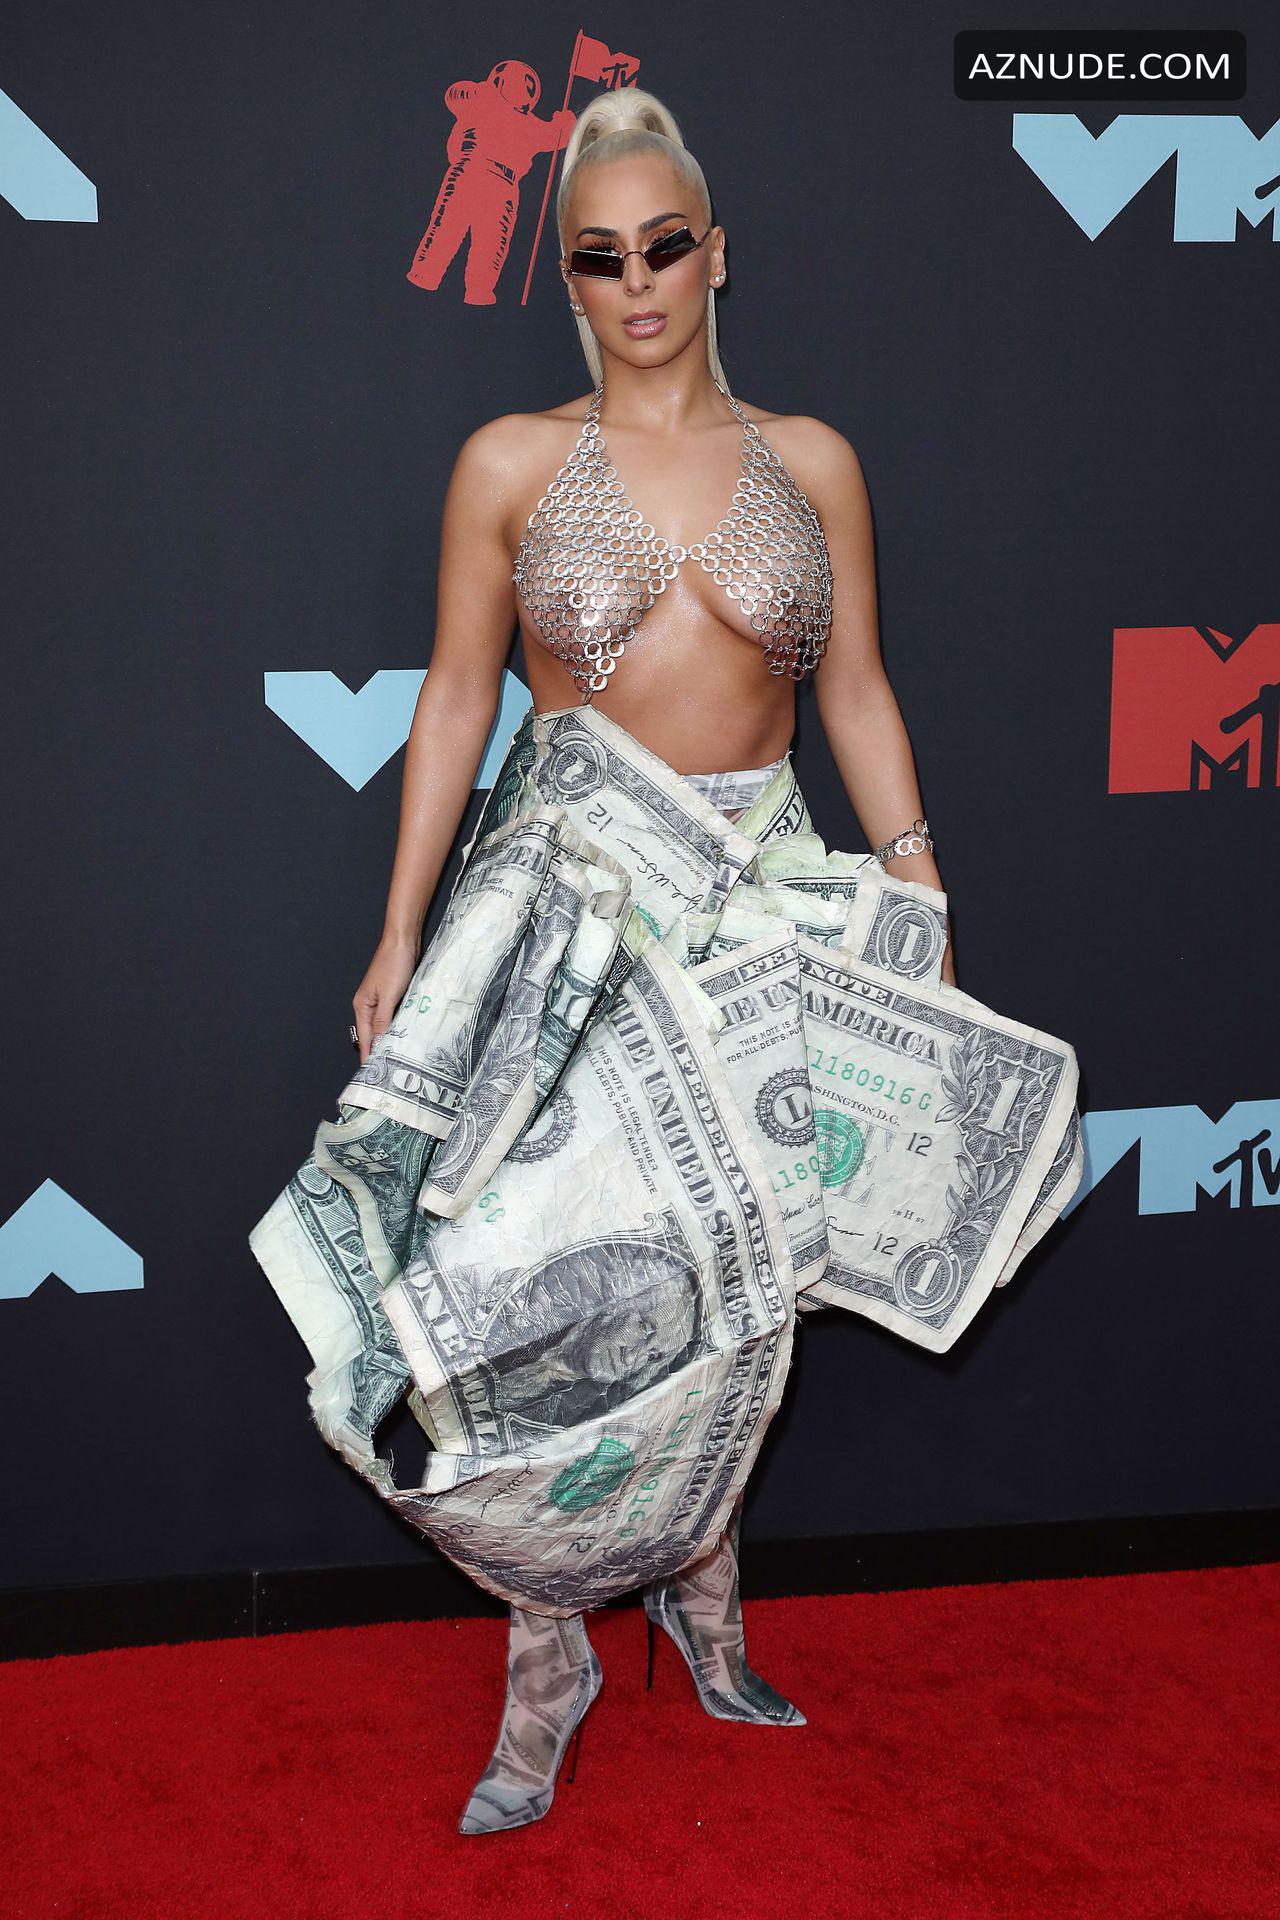 Veronica Vega shows off her tits at theÂ 2019 MTV Video Music Awards in